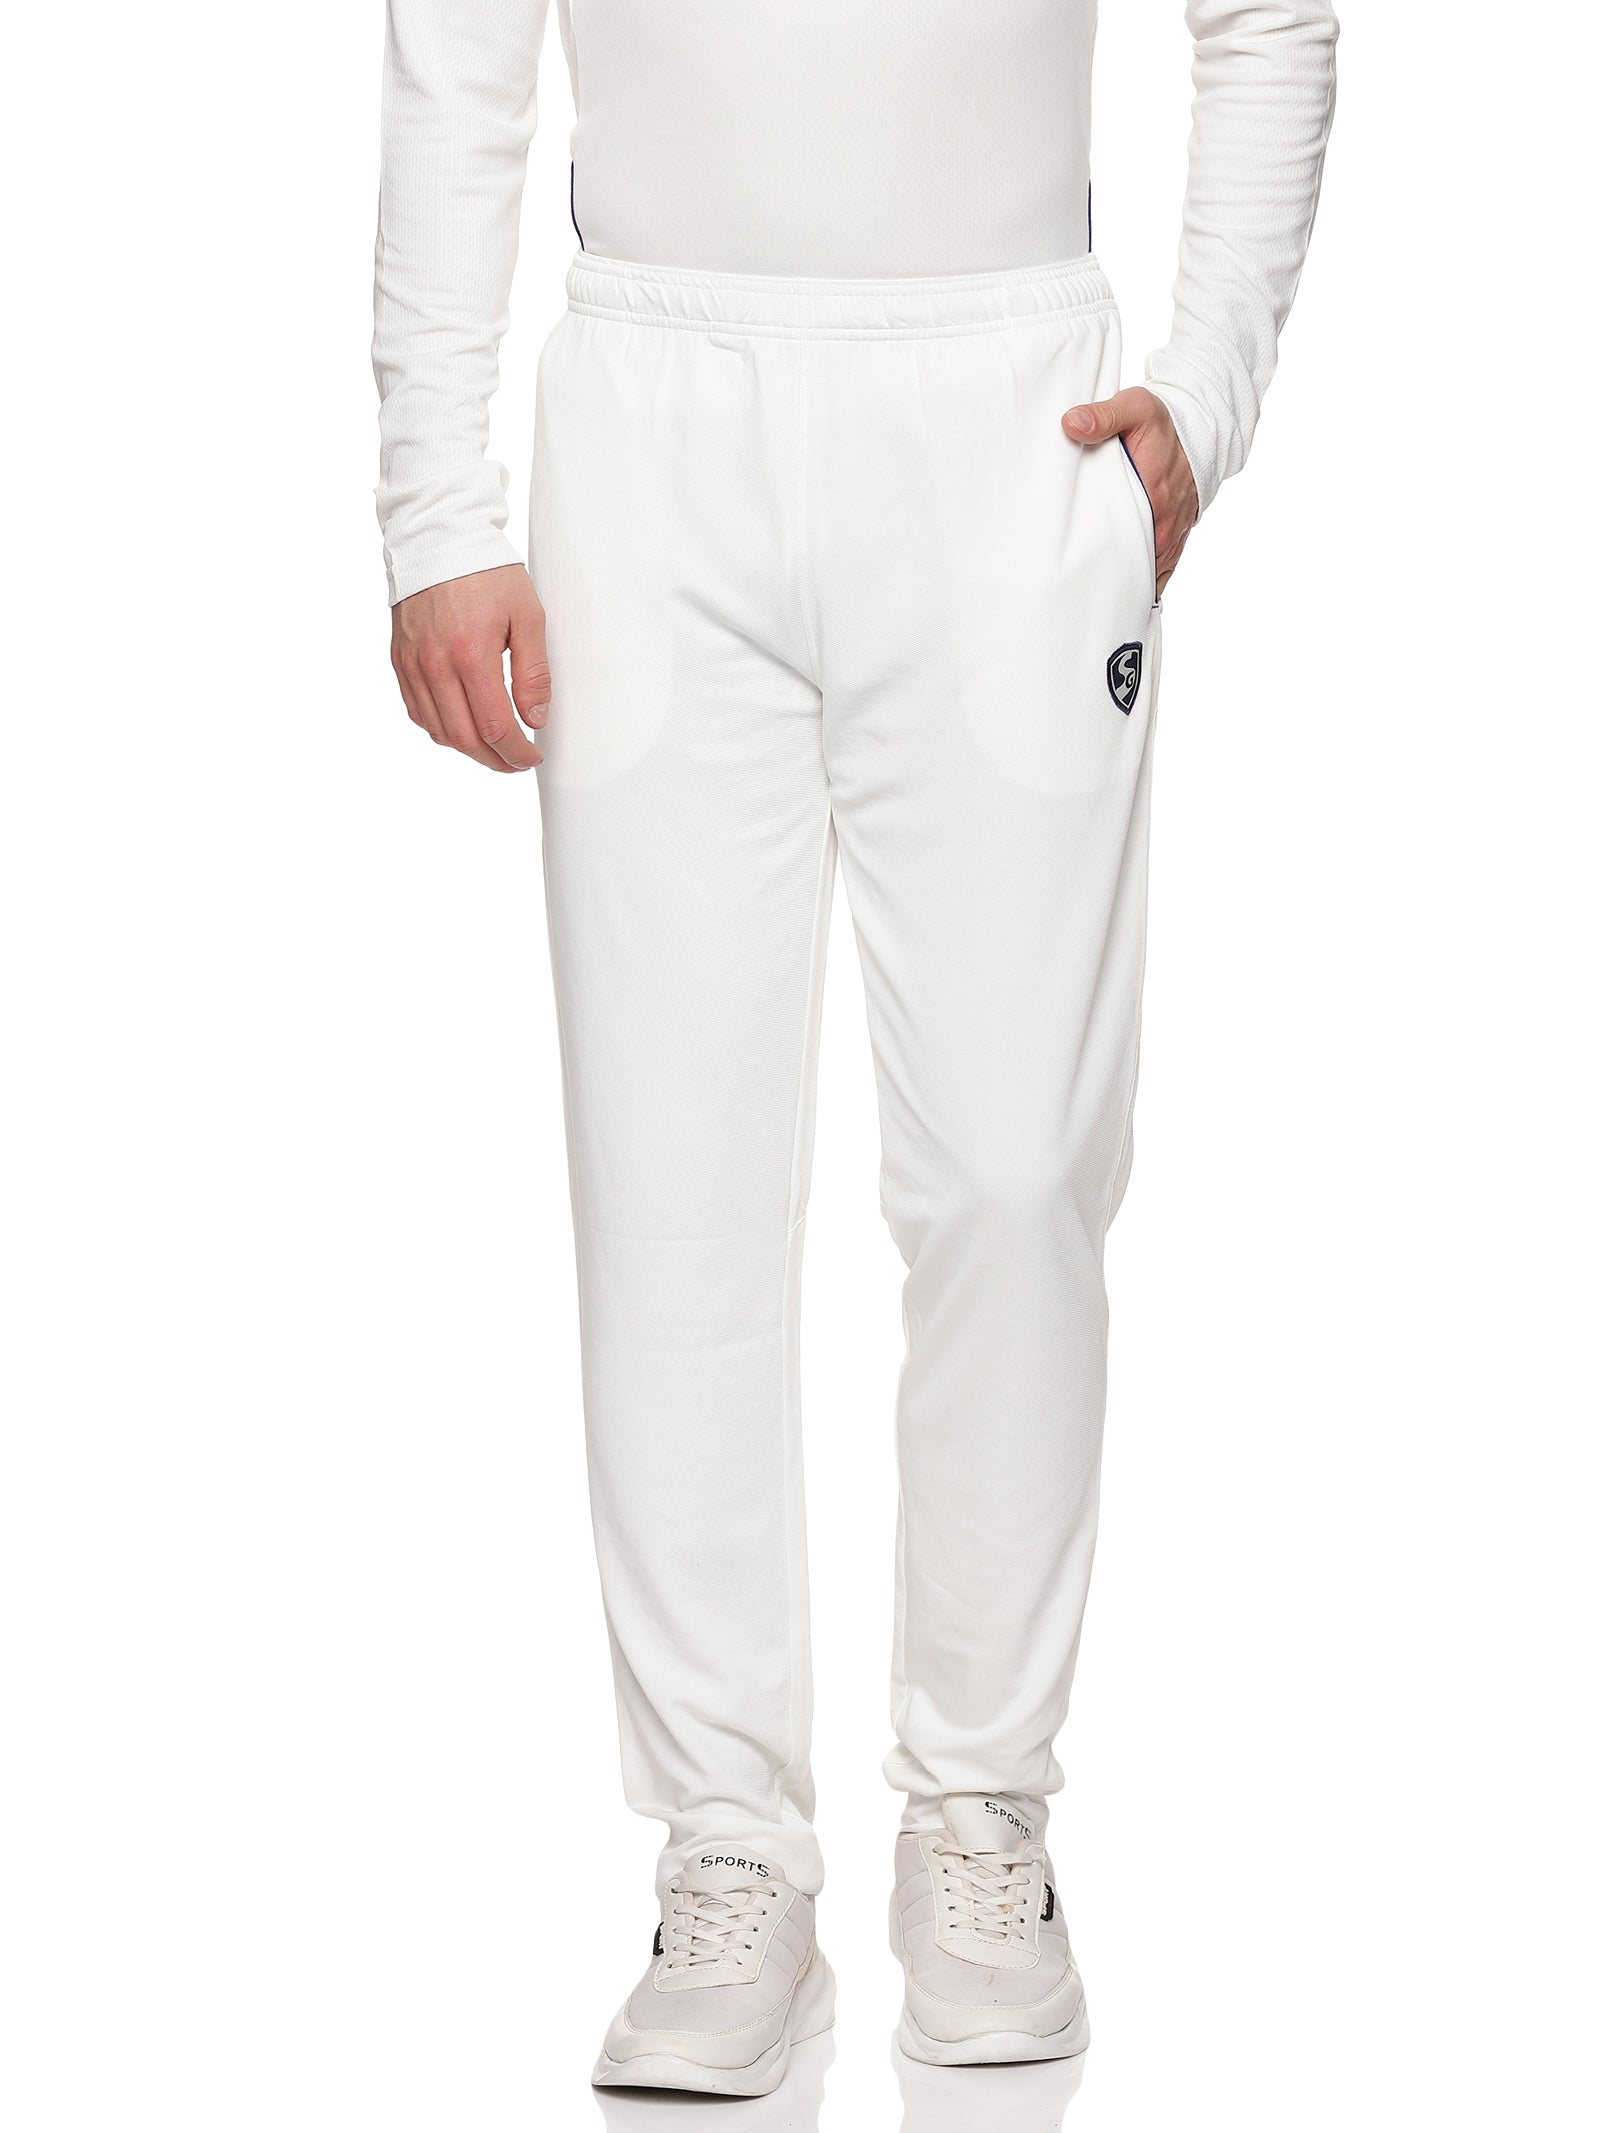 Decathlon Sports India - Track Pants, Straight fit, TSR 500, Adults, Cricket  & All Sports, Black Our team of Engineers and Designers have developed this  technical colored cricket trouser for regular training